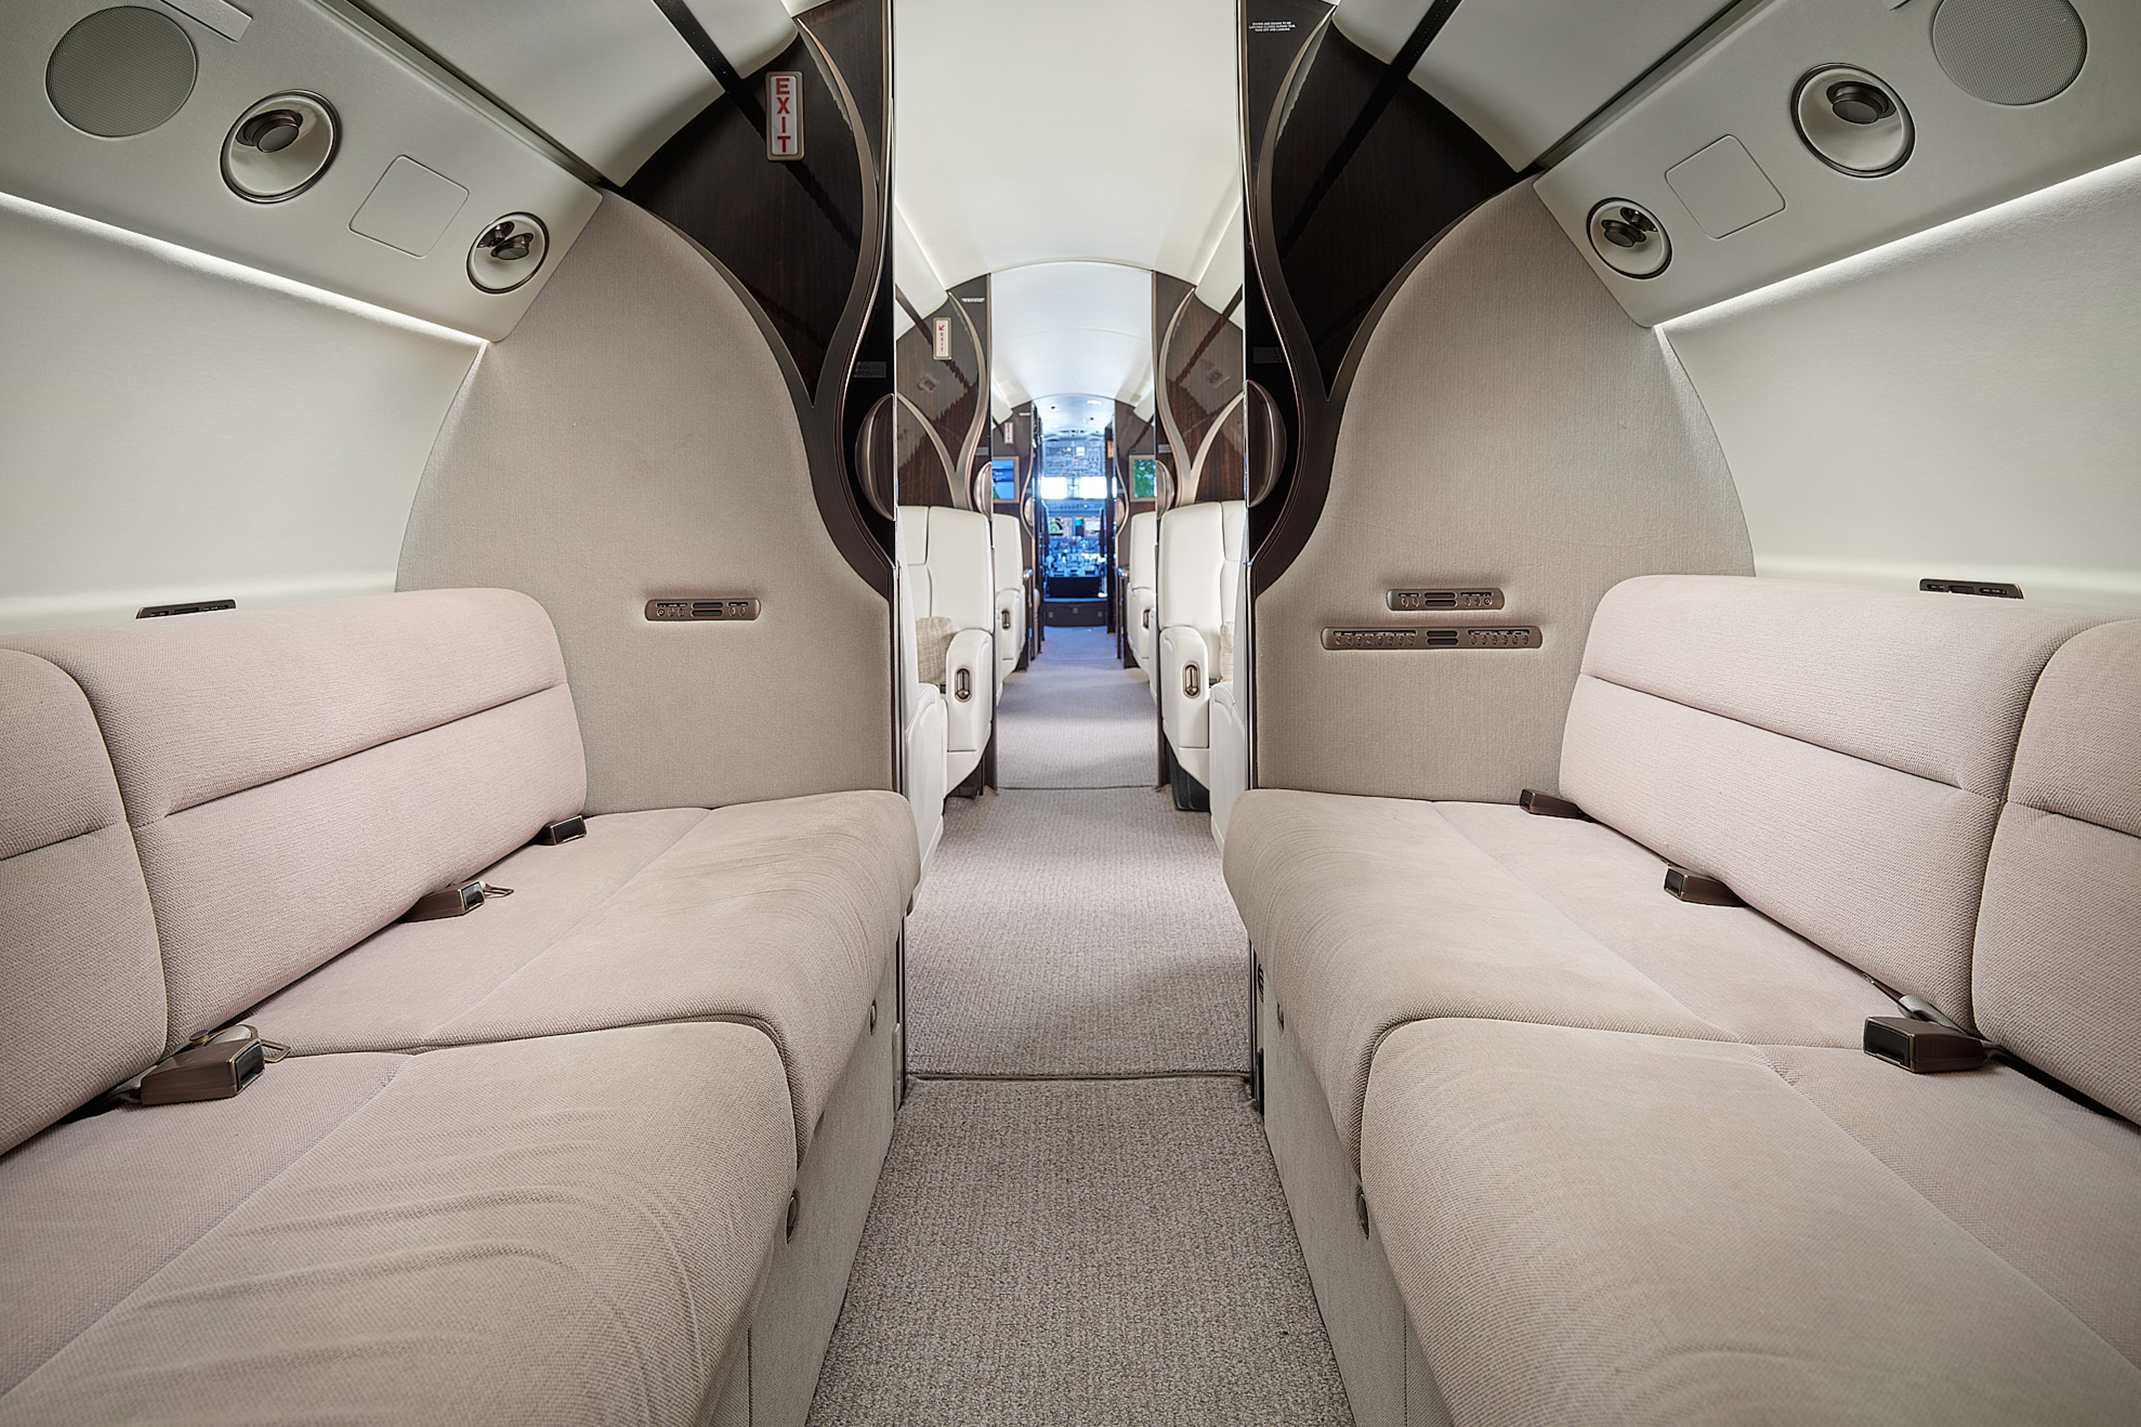 Interior cabin view of Gulfstream G550 N550 rear couch seating